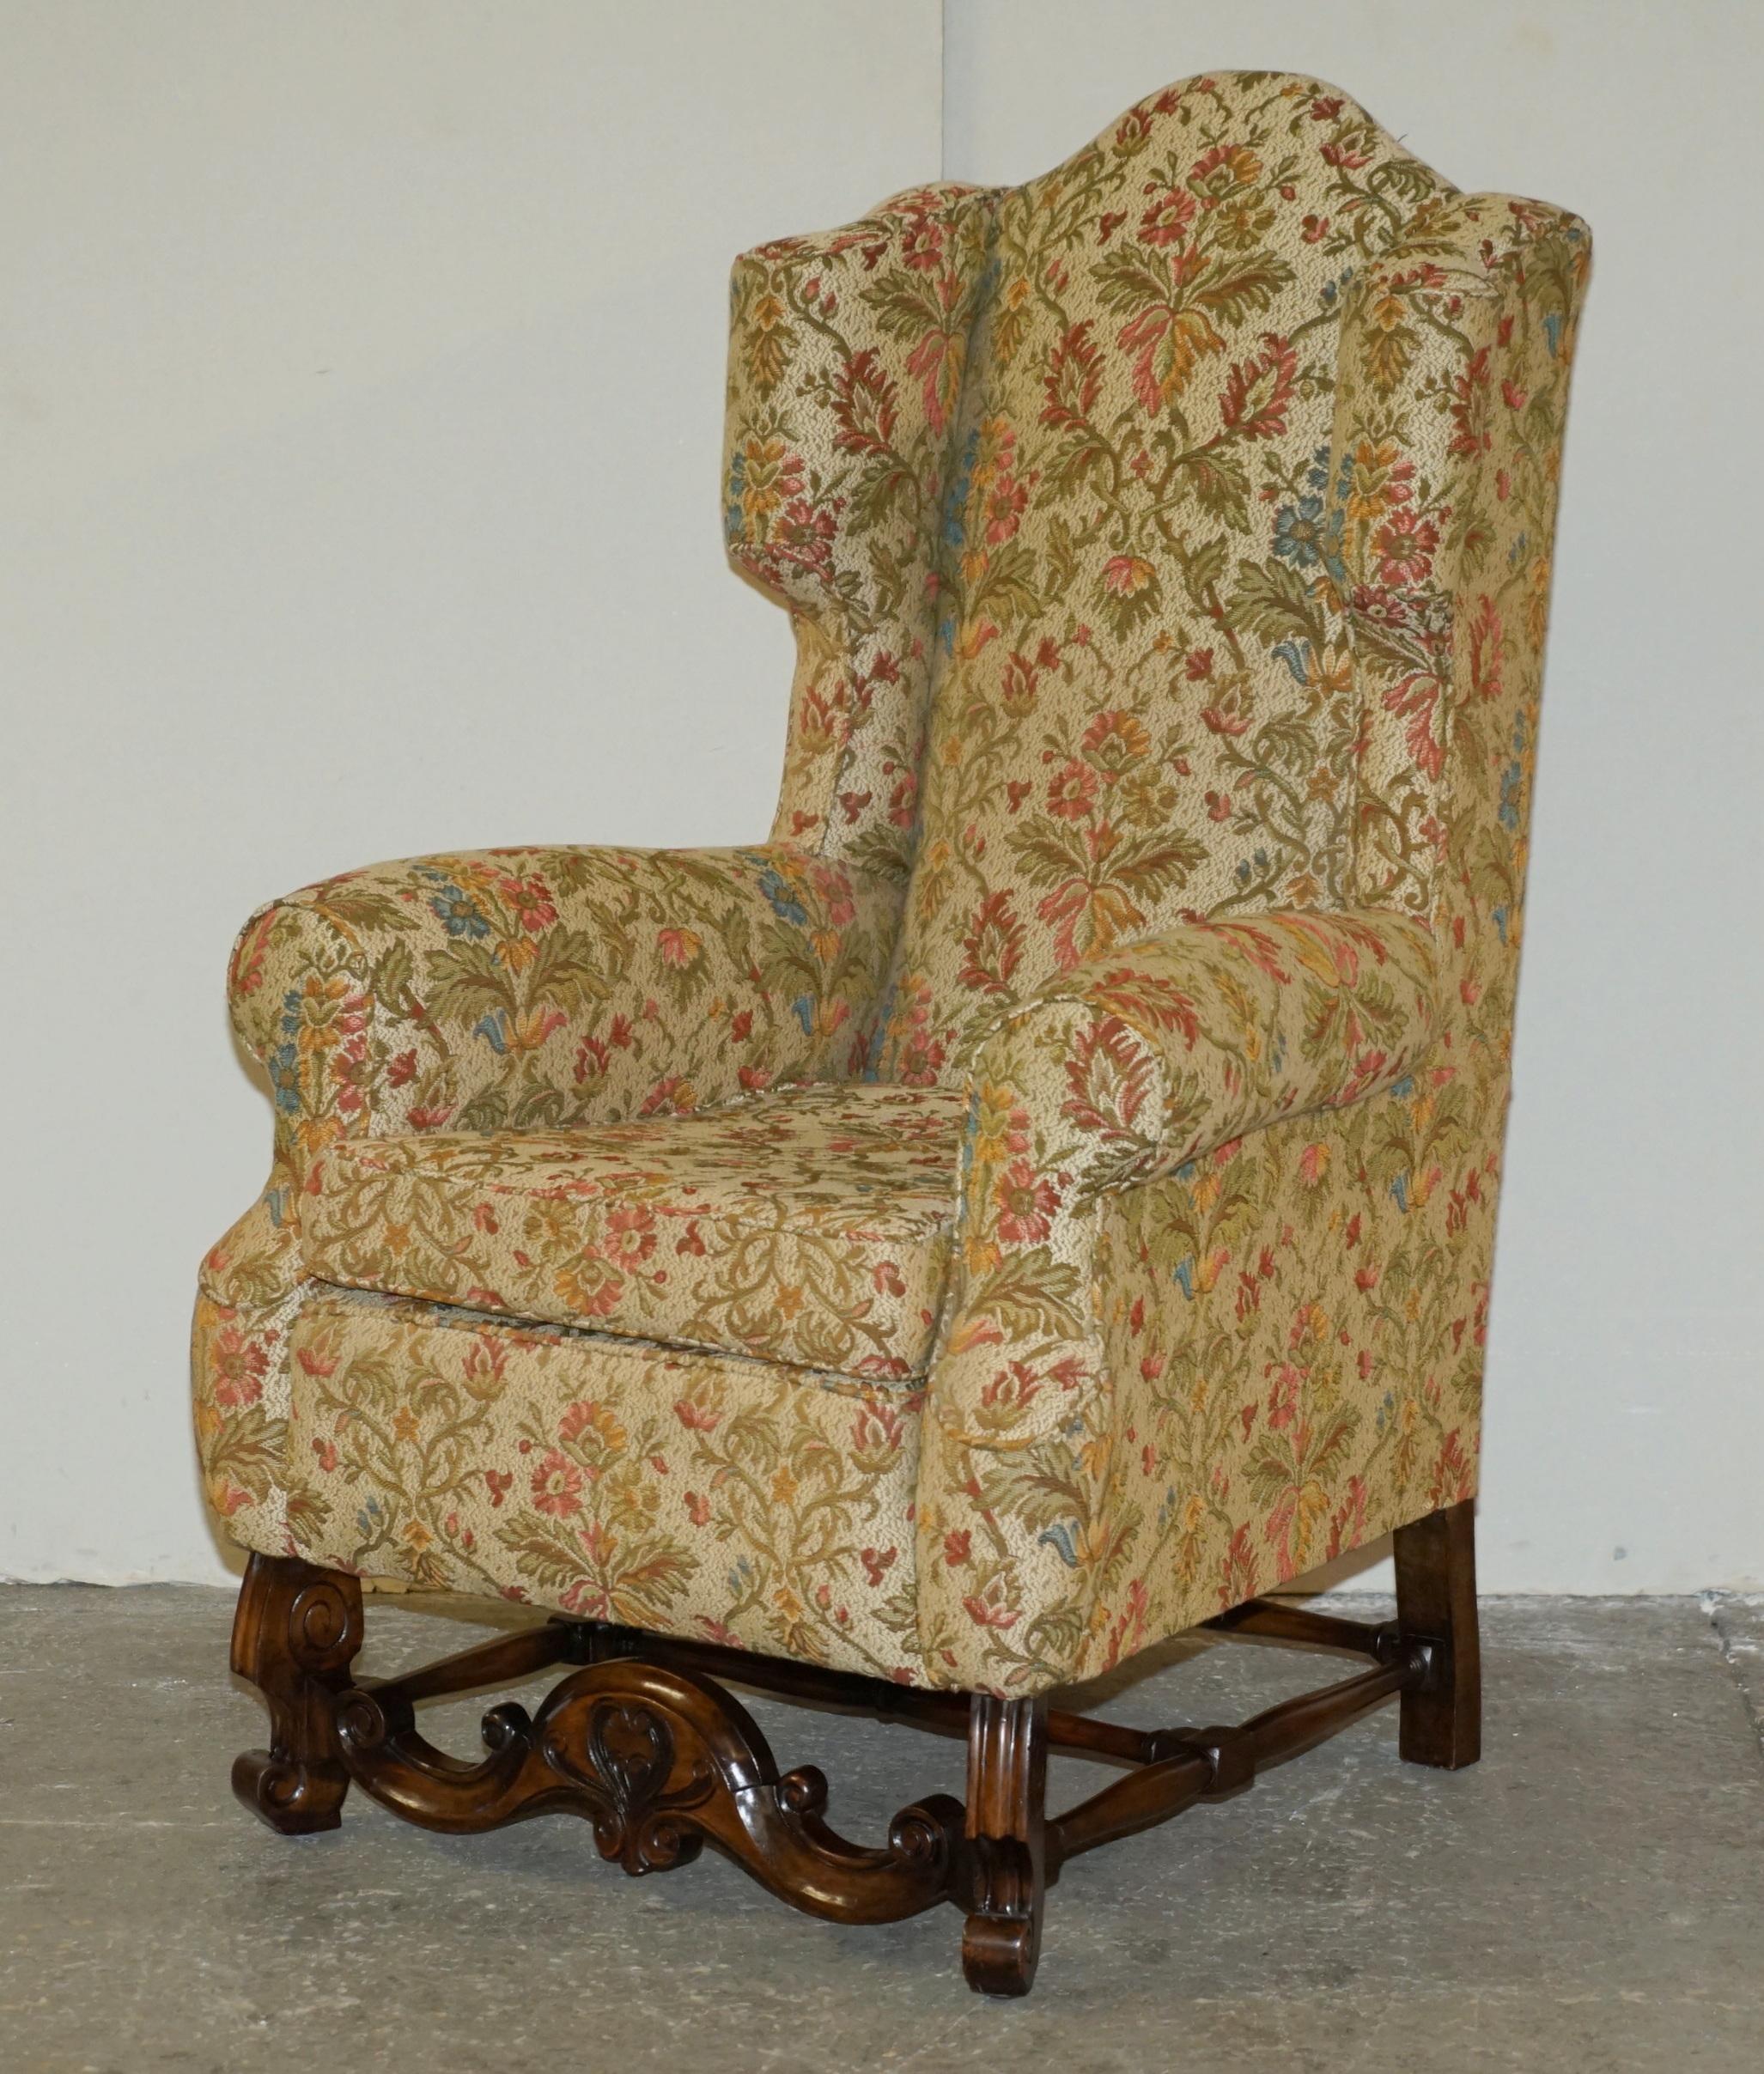 Royal House Antiques

Royal House Antiques is delighted to offer for sale this lovely pair of antique Italian / Carolean throne armchairs with ornately carved bases and floral upholstery which are ideal reupholstery projects 

Please note the